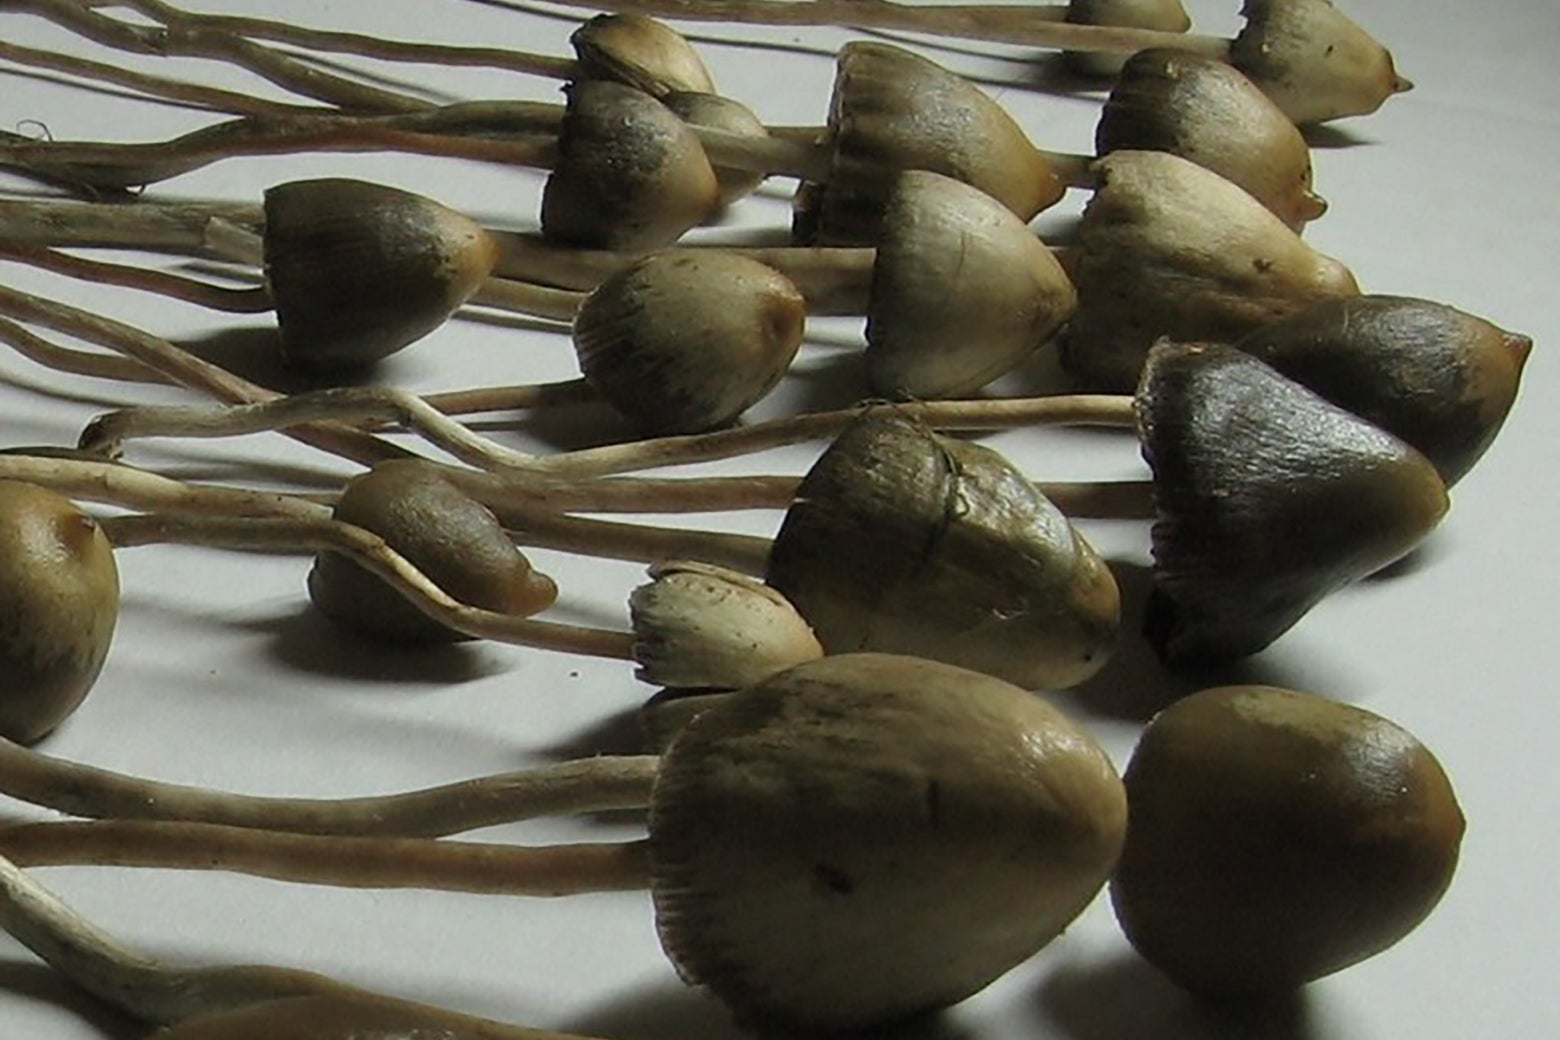 About 18 psilocybin mushrooms, on a white background.